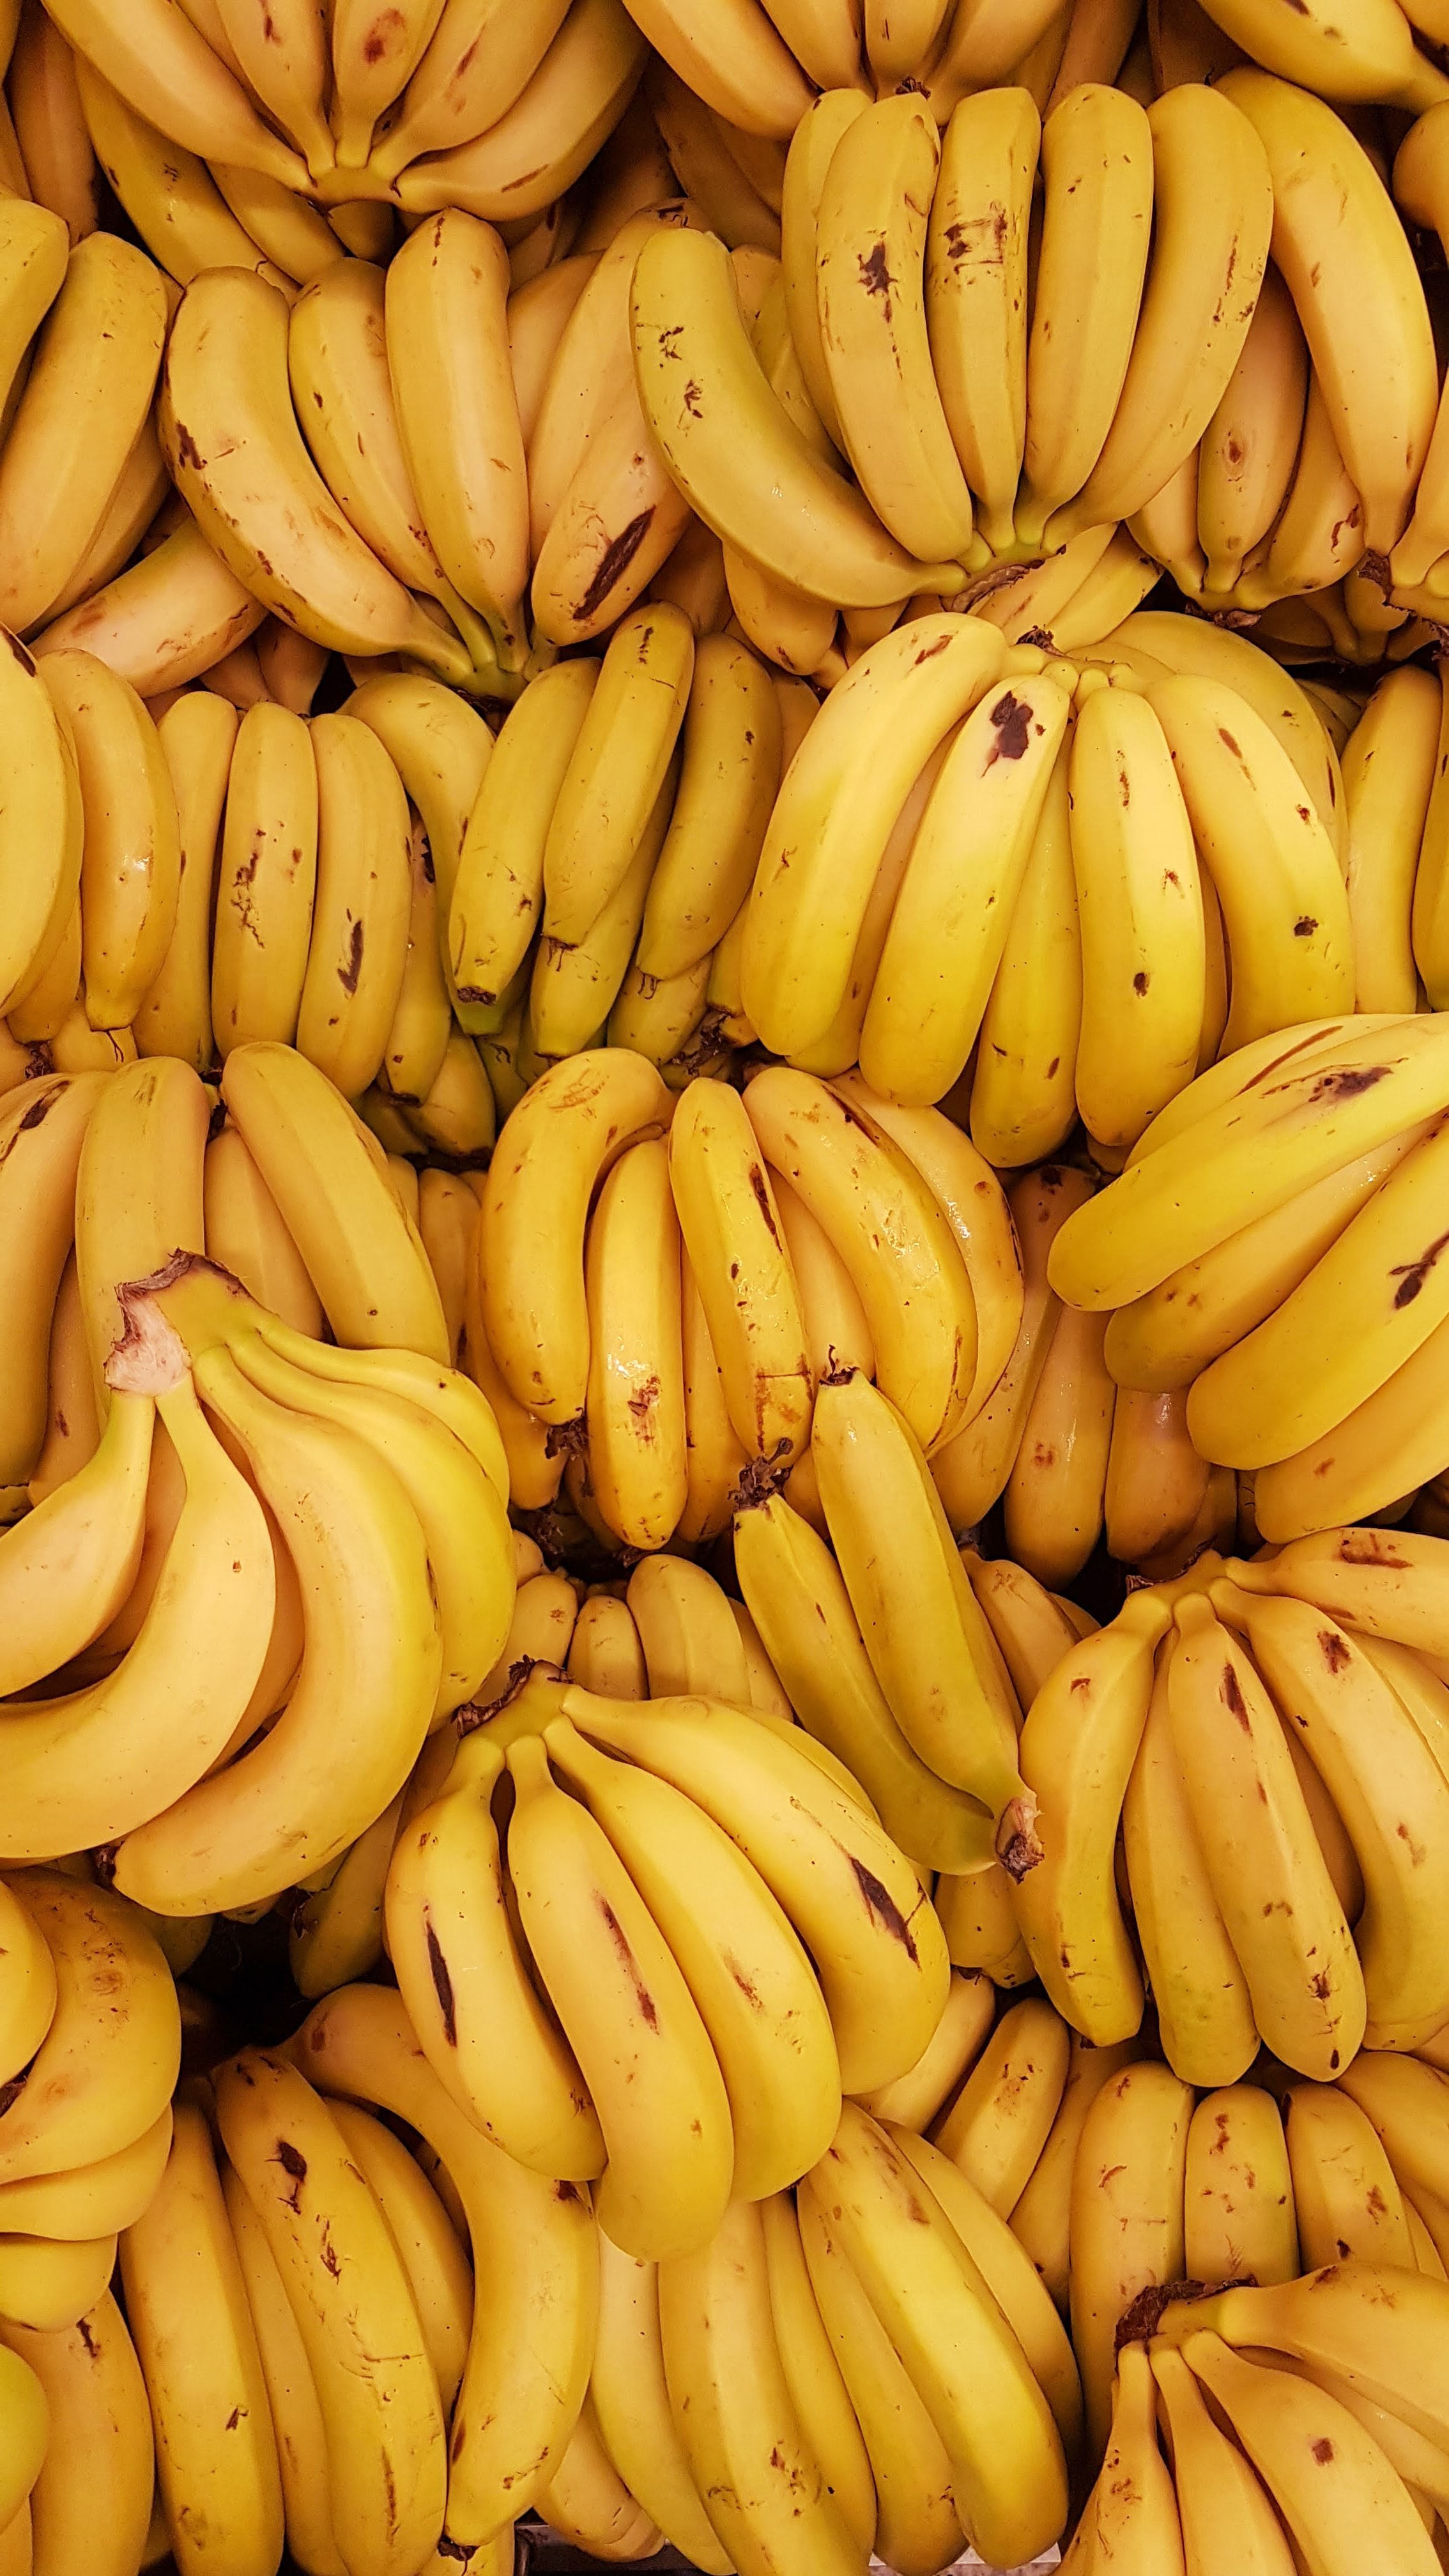 android bunches, fruits, food, bananas, yellow, clusters